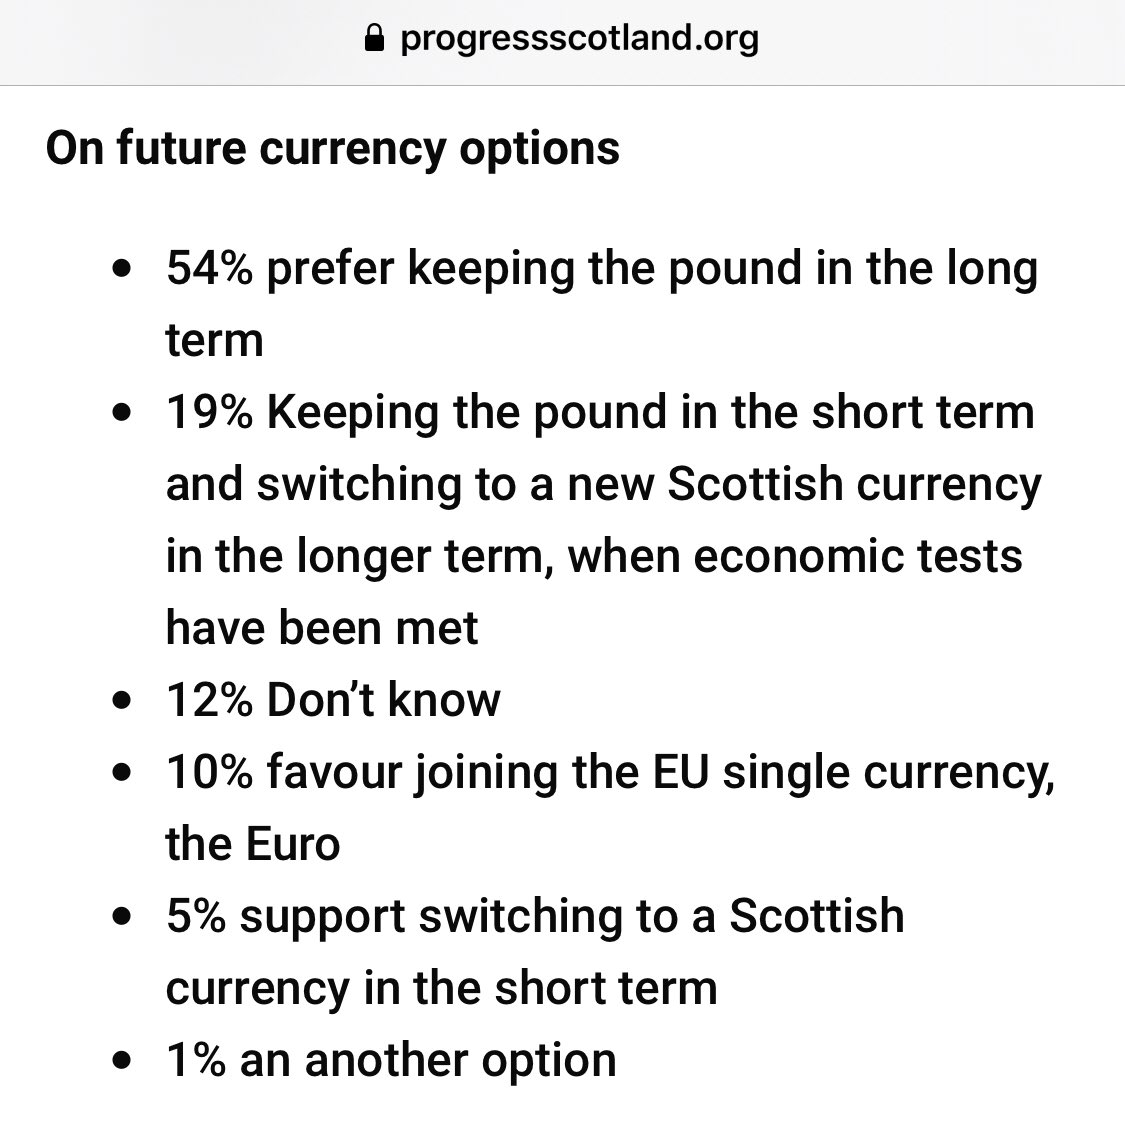 The option most favoured can only be delivered by remaining in the UK - all of the other options are unpopular solutions to a problem only independence would cause/ends/